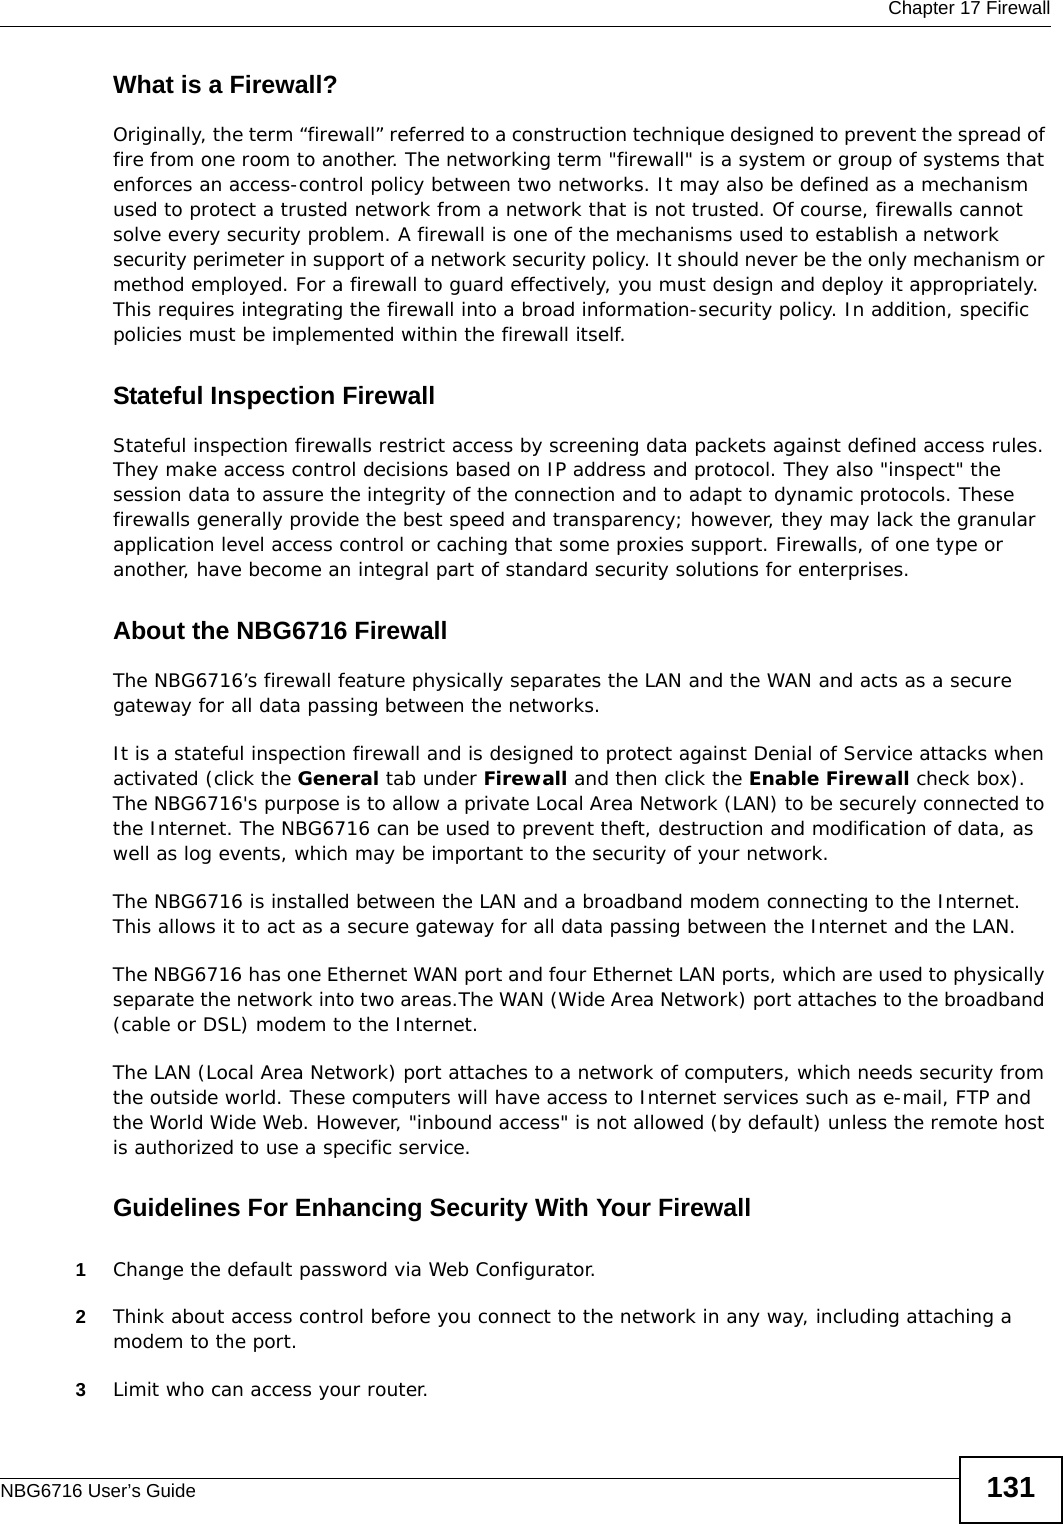  Chapter 17 FirewallNBG6716 User’s Guide 131What is a Firewall?Originally, the term “firewall” referred to a construction technique designed to prevent the spread of fire from one room to another. The networking term &quot;firewall&quot; is a system or group of systems that enforces an access-control policy between two networks. It may also be defined as a mechanism used to protect a trusted network from a network that is not trusted. Of course, firewalls cannot solve every security problem. A firewall is one of the mechanisms used to establish a network security perimeter in support of a network security policy. It should never be the only mechanism or method employed. For a firewall to guard effectively, you must design and deploy it appropriately. This requires integrating the firewall into a broad information-security policy. In addition, specific policies must be implemented within the firewall itself. Stateful Inspection Firewall Stateful inspection firewalls restrict access by screening data packets against defined access rules. They make access control decisions based on IP address and protocol. They also &quot;inspect&quot; the session data to assure the integrity of the connection and to adapt to dynamic protocols. These firewalls generally provide the best speed and transparency; however, they may lack the granular application level access control or caching that some proxies support. Firewalls, of one type or another, have become an integral part of standard security solutions for enterprises.About the NBG6716 FirewallThe NBG6716’s firewall feature physically separates the LAN and the WAN and acts as a secure gateway for all data passing between the networks.It is a stateful inspection firewall and is designed to protect against Denial of Service attacks when activated (click the General tab under Firewall and then click the Enable Firewall check box). The NBG6716&apos;s purpose is to allow a private Local Area Network (LAN) to be securely connected to the Internet. The NBG6716 can be used to prevent theft, destruction and modification of data, as well as log events, which may be important to the security of your network. The NBG6716 is installed between the LAN and a broadband modem connecting to the Internet. This allows it to act as a secure gateway for all data passing between the Internet and the LAN.The NBG6716 has one Ethernet WAN port and four Ethernet LAN ports, which are used to physically separate the network into two areas.The WAN (Wide Area Network) port attaches to the broadband (cable or DSL) modem to the Internet.The LAN (Local Area Network) port attaches to a network of computers, which needs security from the outside world. These computers will have access to Internet services such as e-mail, FTP and the World Wide Web. However, &quot;inbound access&quot; is not allowed (by default) unless the remote host is authorized to use a specific service.Guidelines For Enhancing Security With Your Firewall1Change the default password via Web Configurator. 2Think about access control before you connect to the network in any way, including attaching a modem to the port. 3Limit who can access your router. 